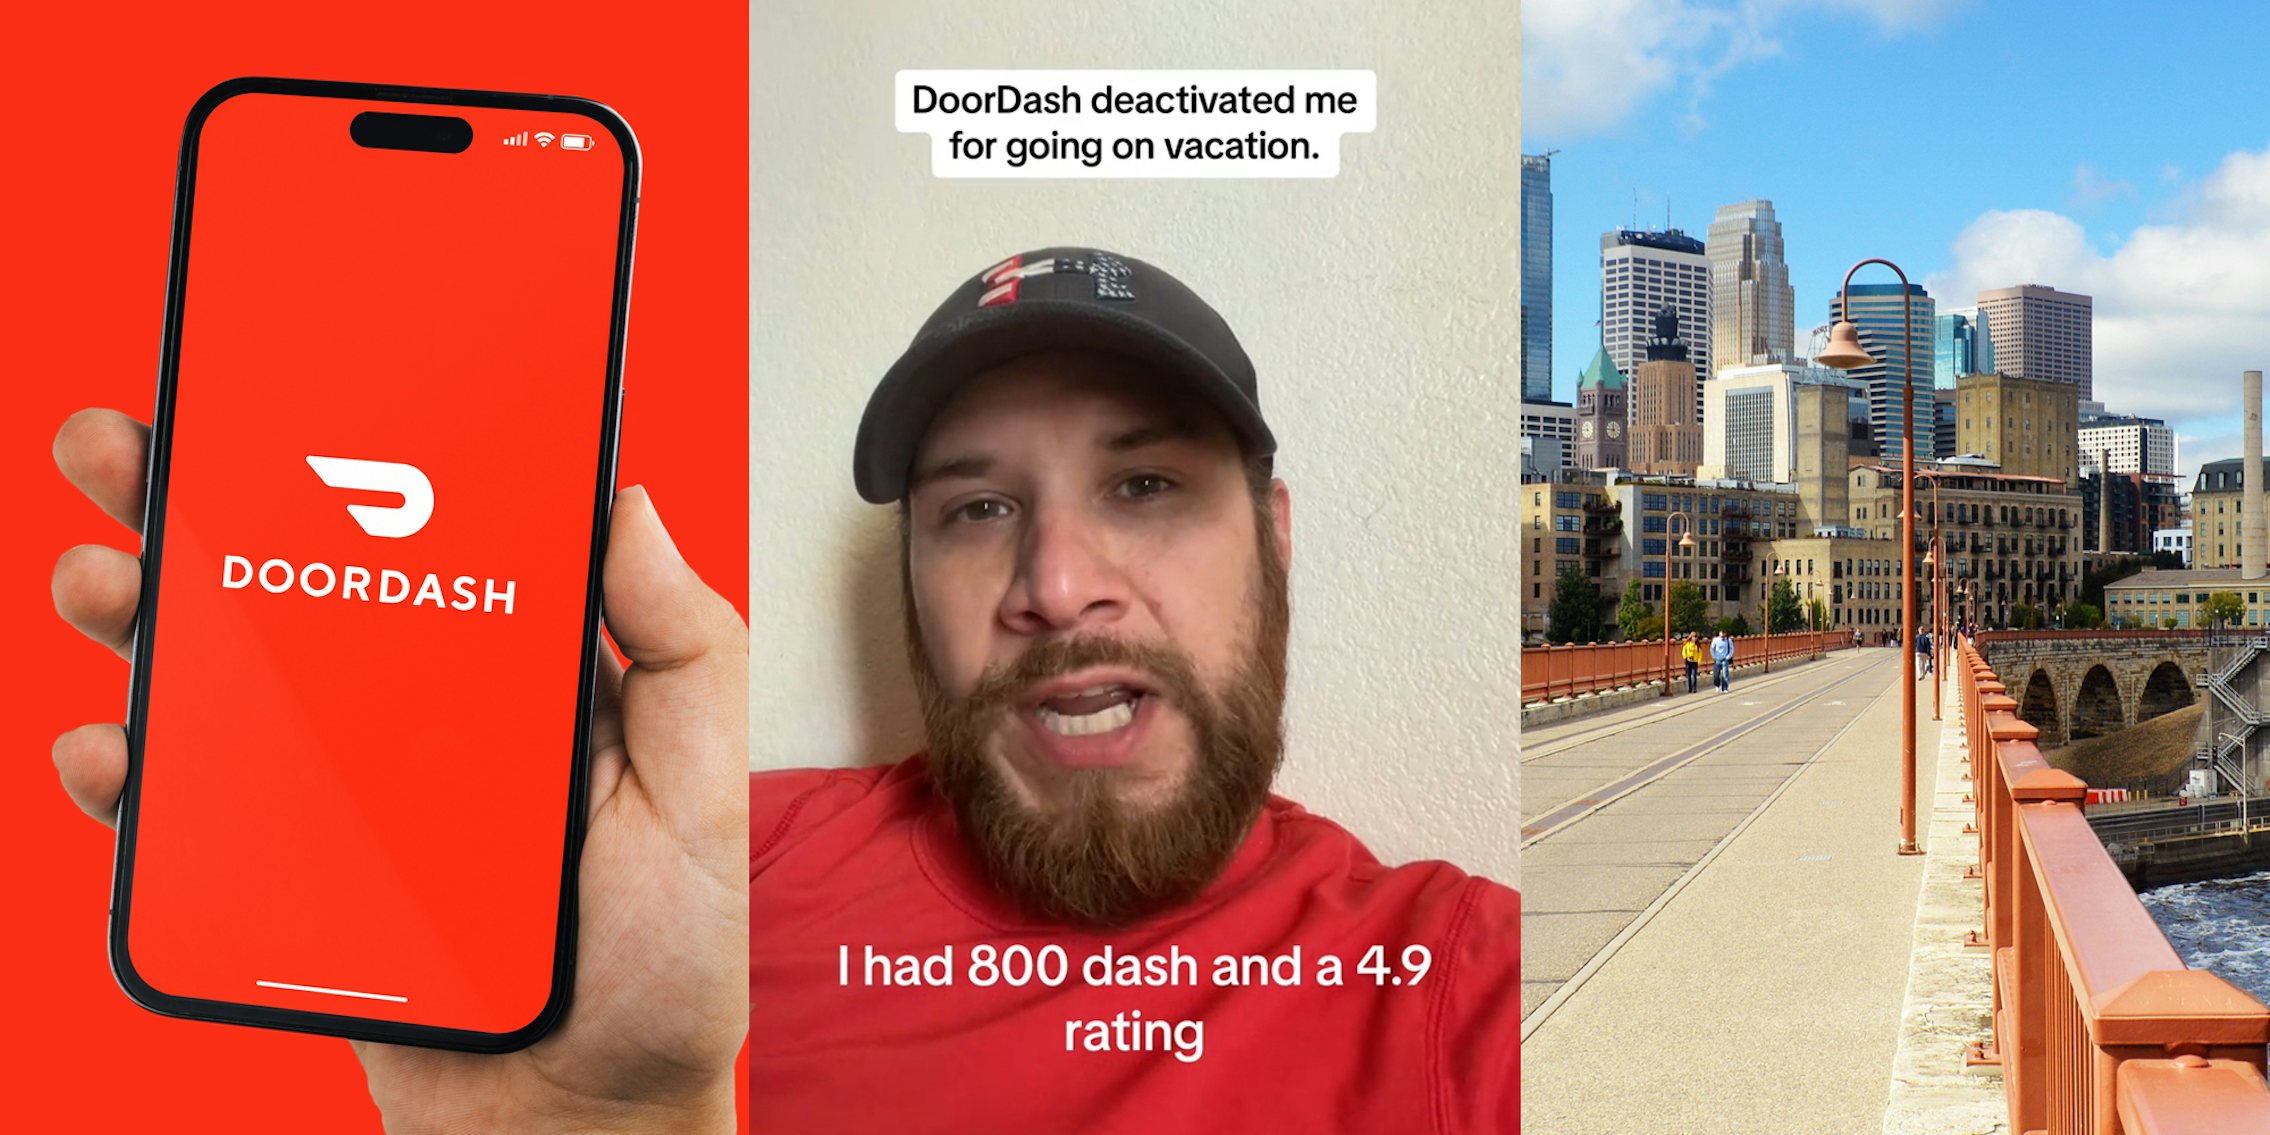 hand holding phone with DoorDash on screen in front of red background (l) DoorDash driver speaking with caption 'DoorDash deactivated me for going on vacation I had 800 dash and a 4.9 rating' (c) Downtown of Minneapolis Minnesota (r)